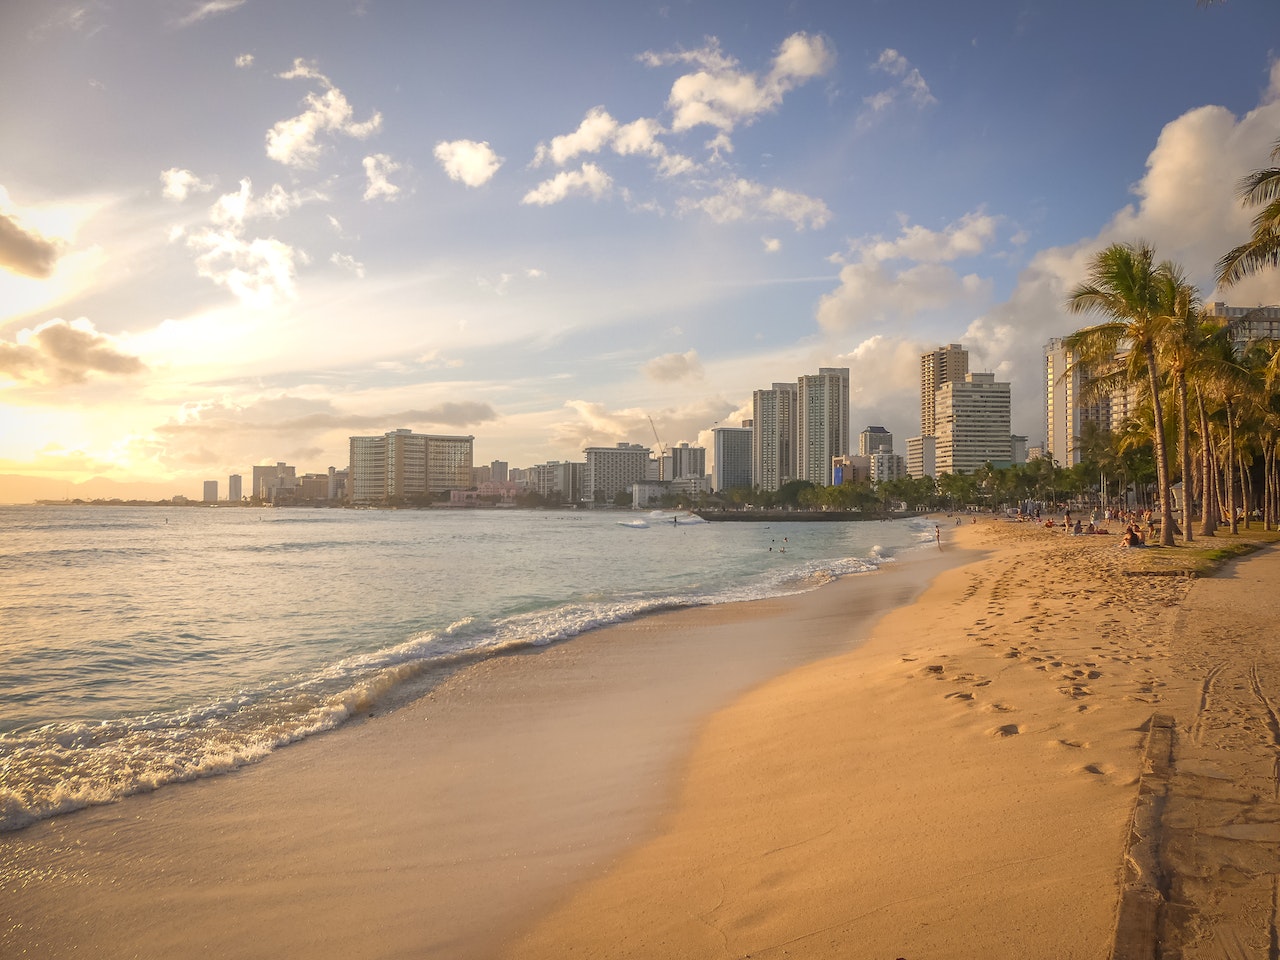 Planning A Trip To Hawaii: 5 Essential Details